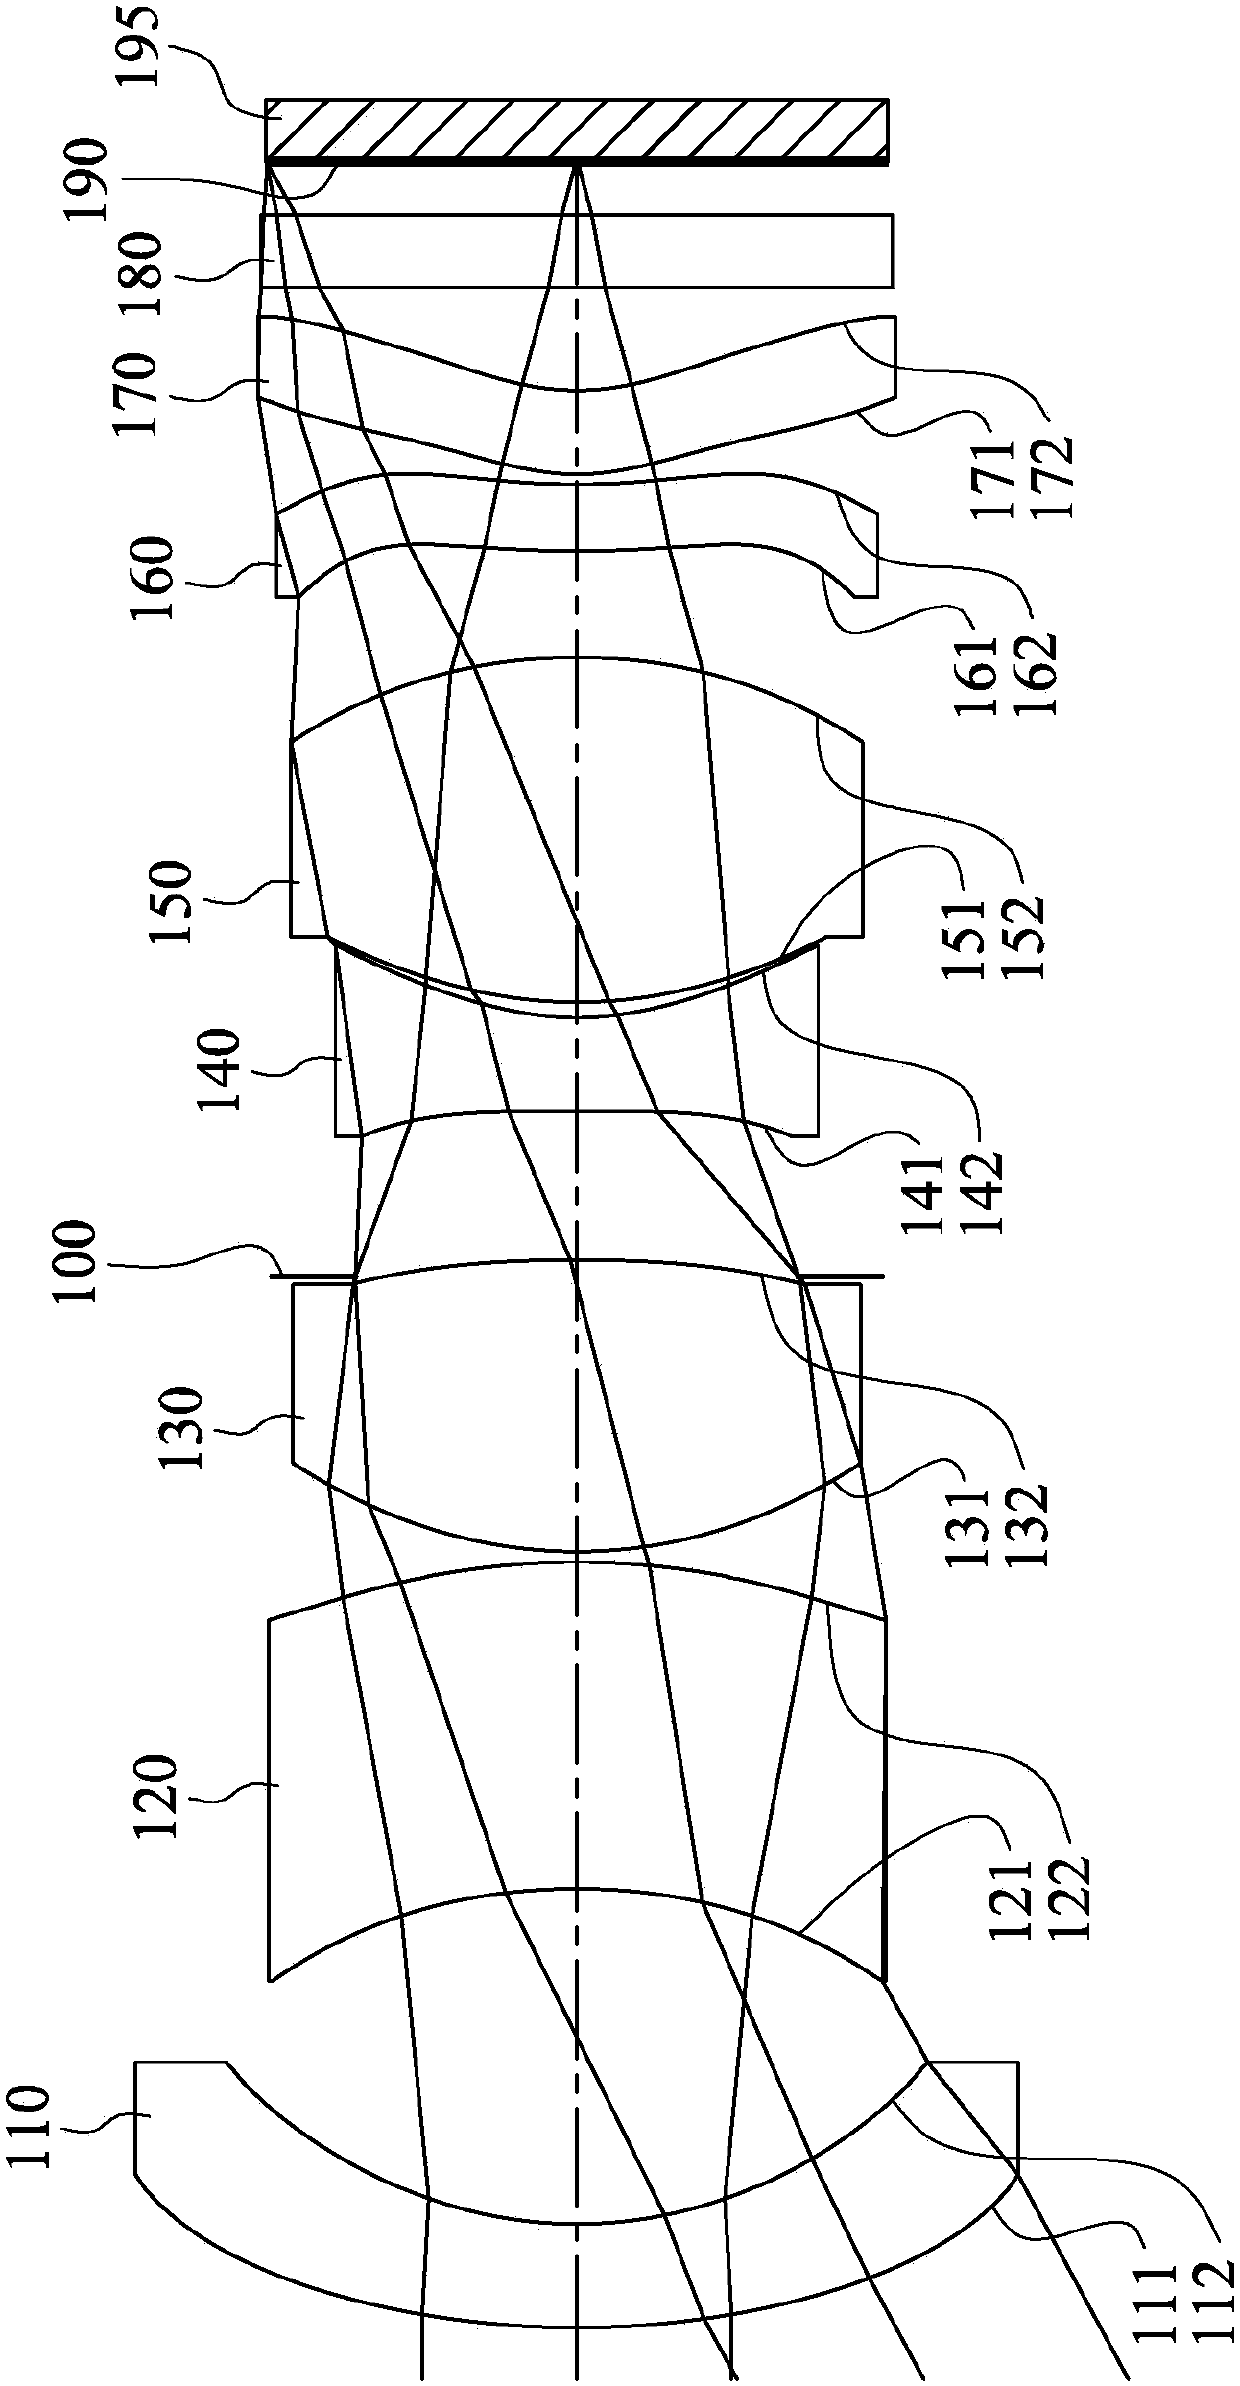 Optical imaging system, imaging device and electronic device